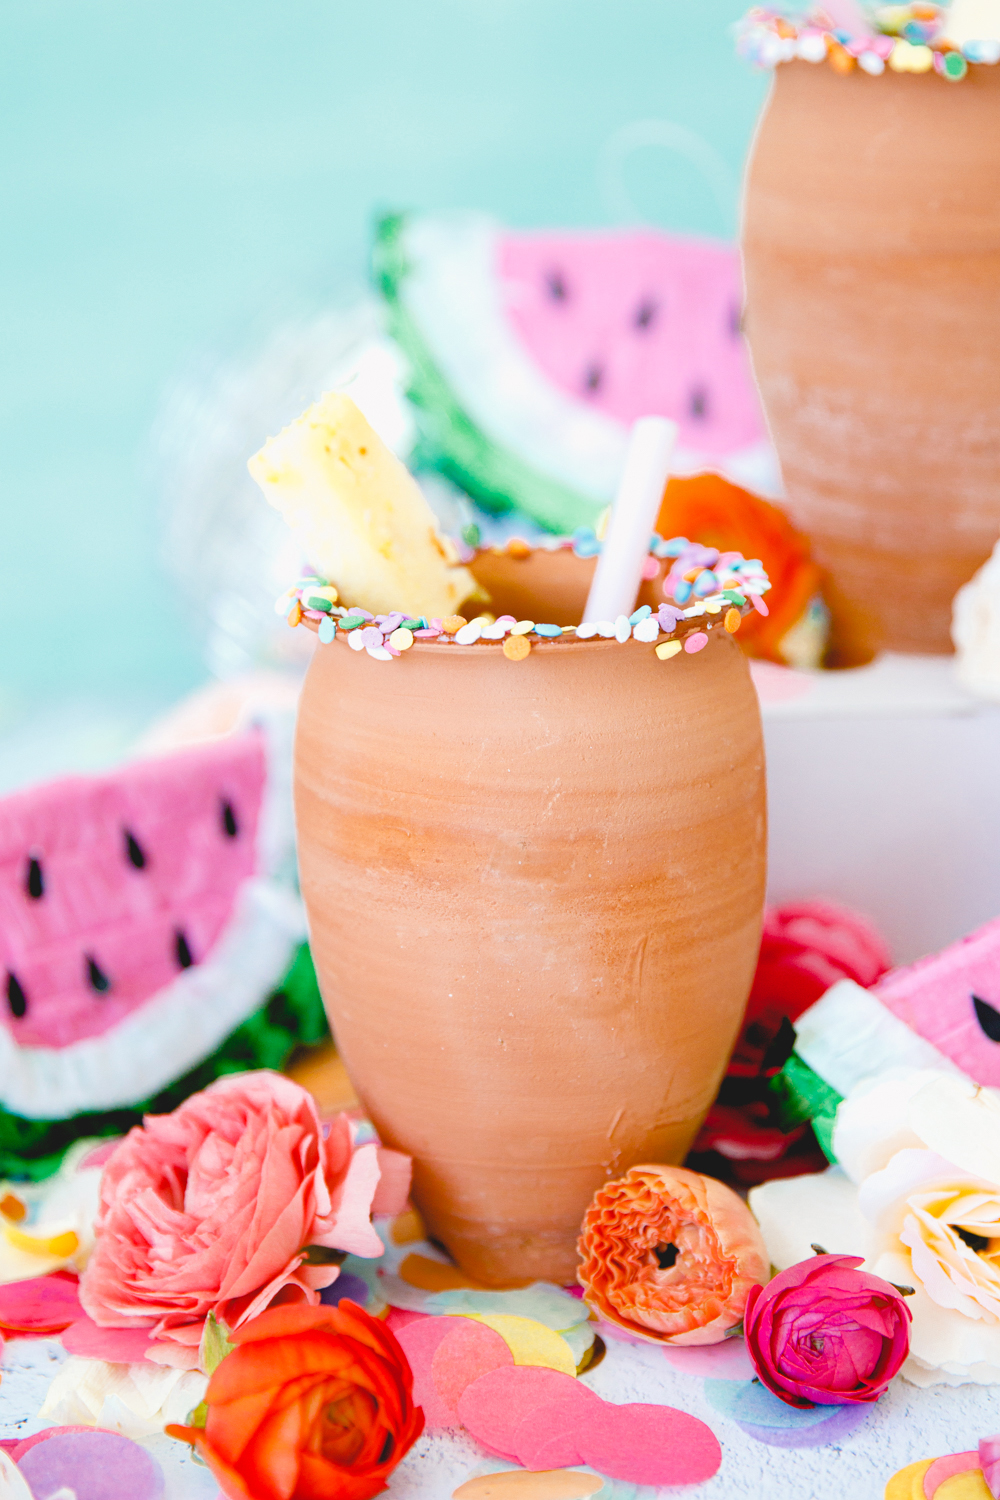 Time For A Fiesta With This Watermelon + Cantaloupe Pinata Cocktail For All!